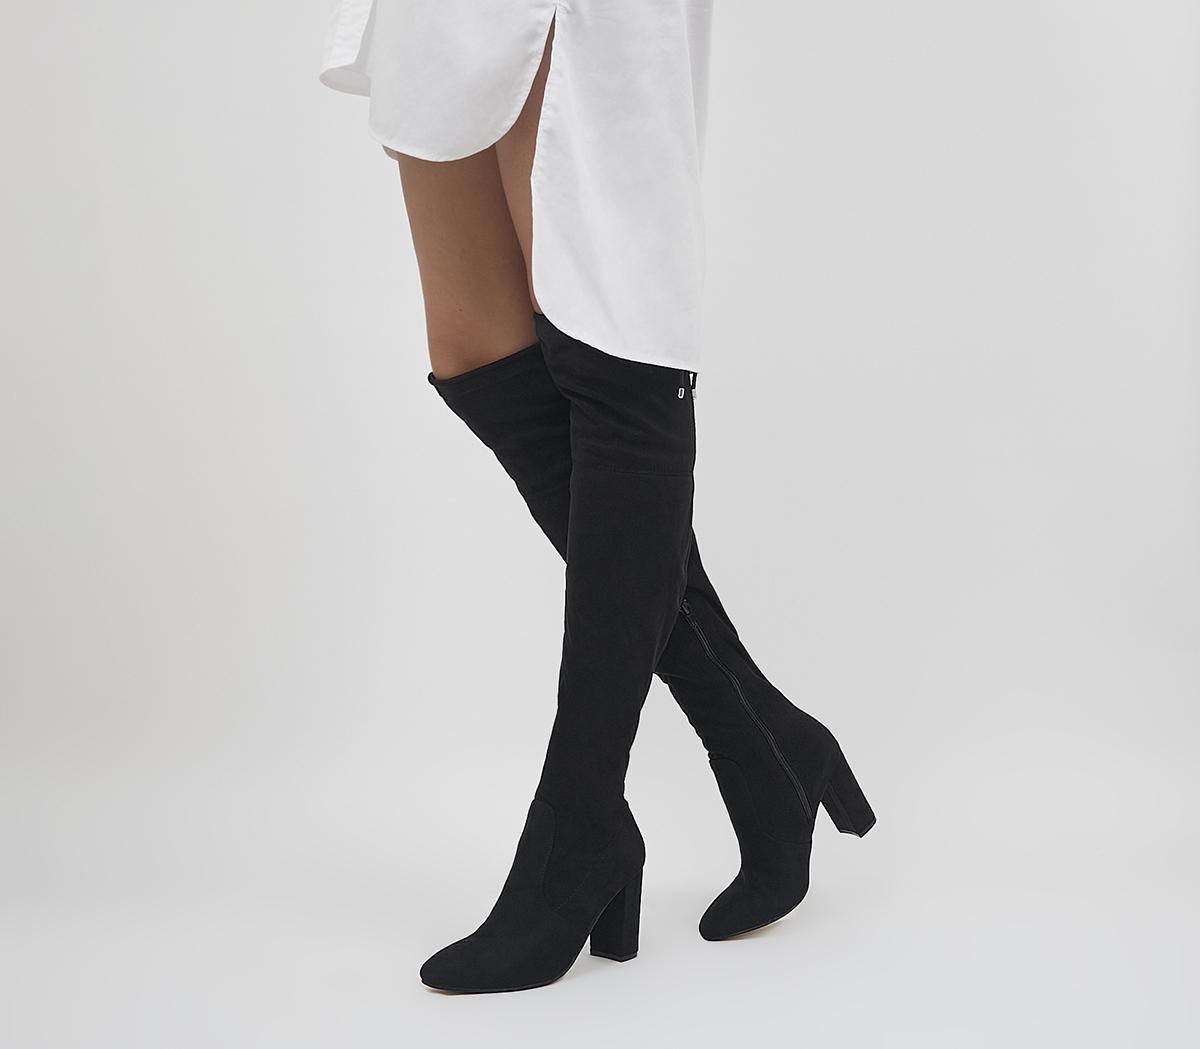 OfficeKatie Over The Knee Stretch BootsBlack